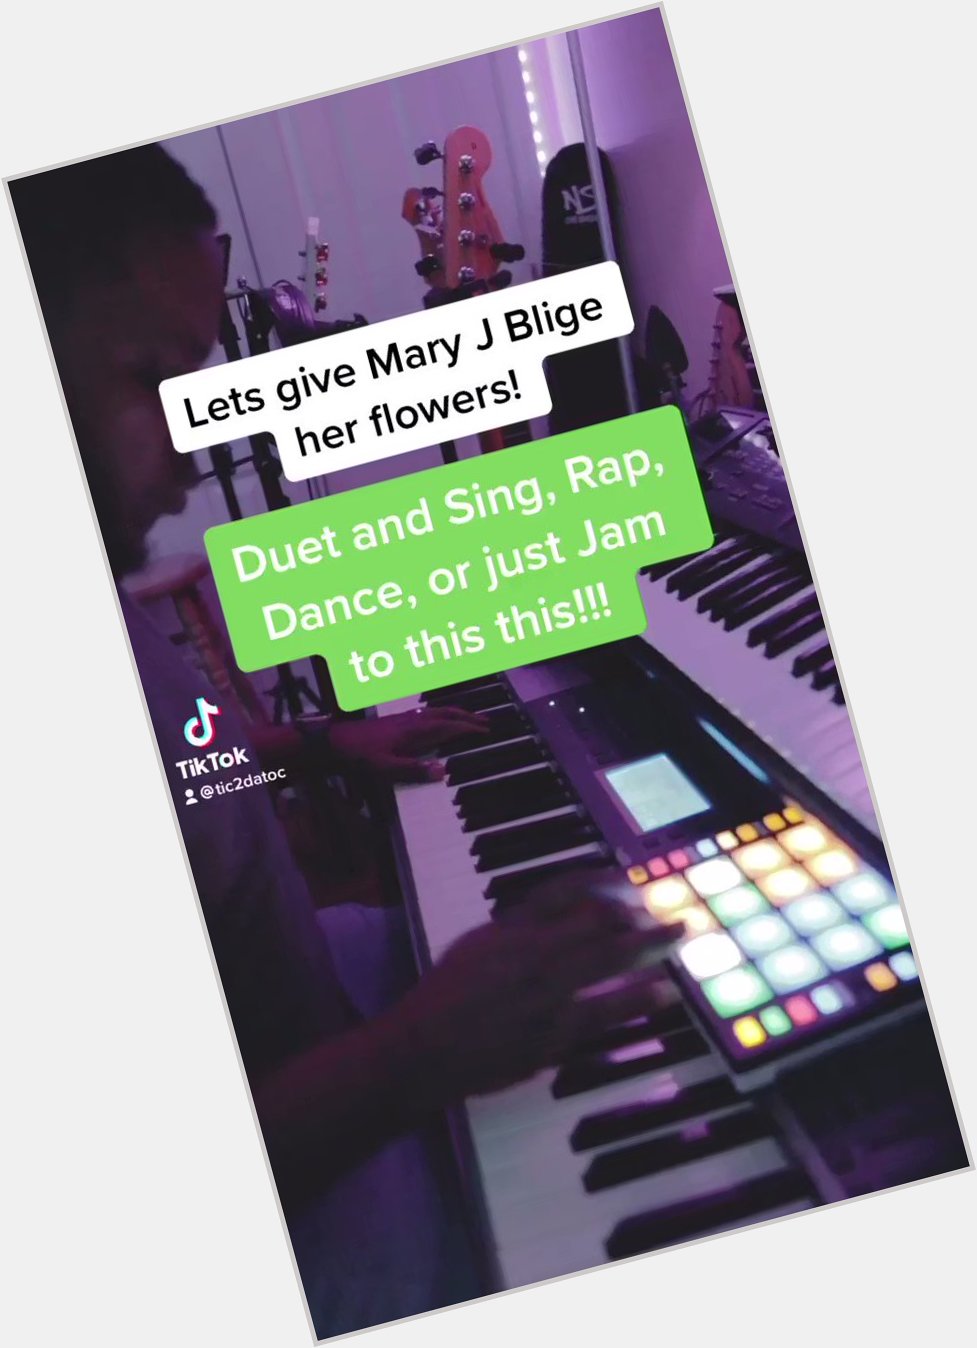 Happy Birthday Mary J Blige , Jan 11 Sharing this cover over on TikTok! 